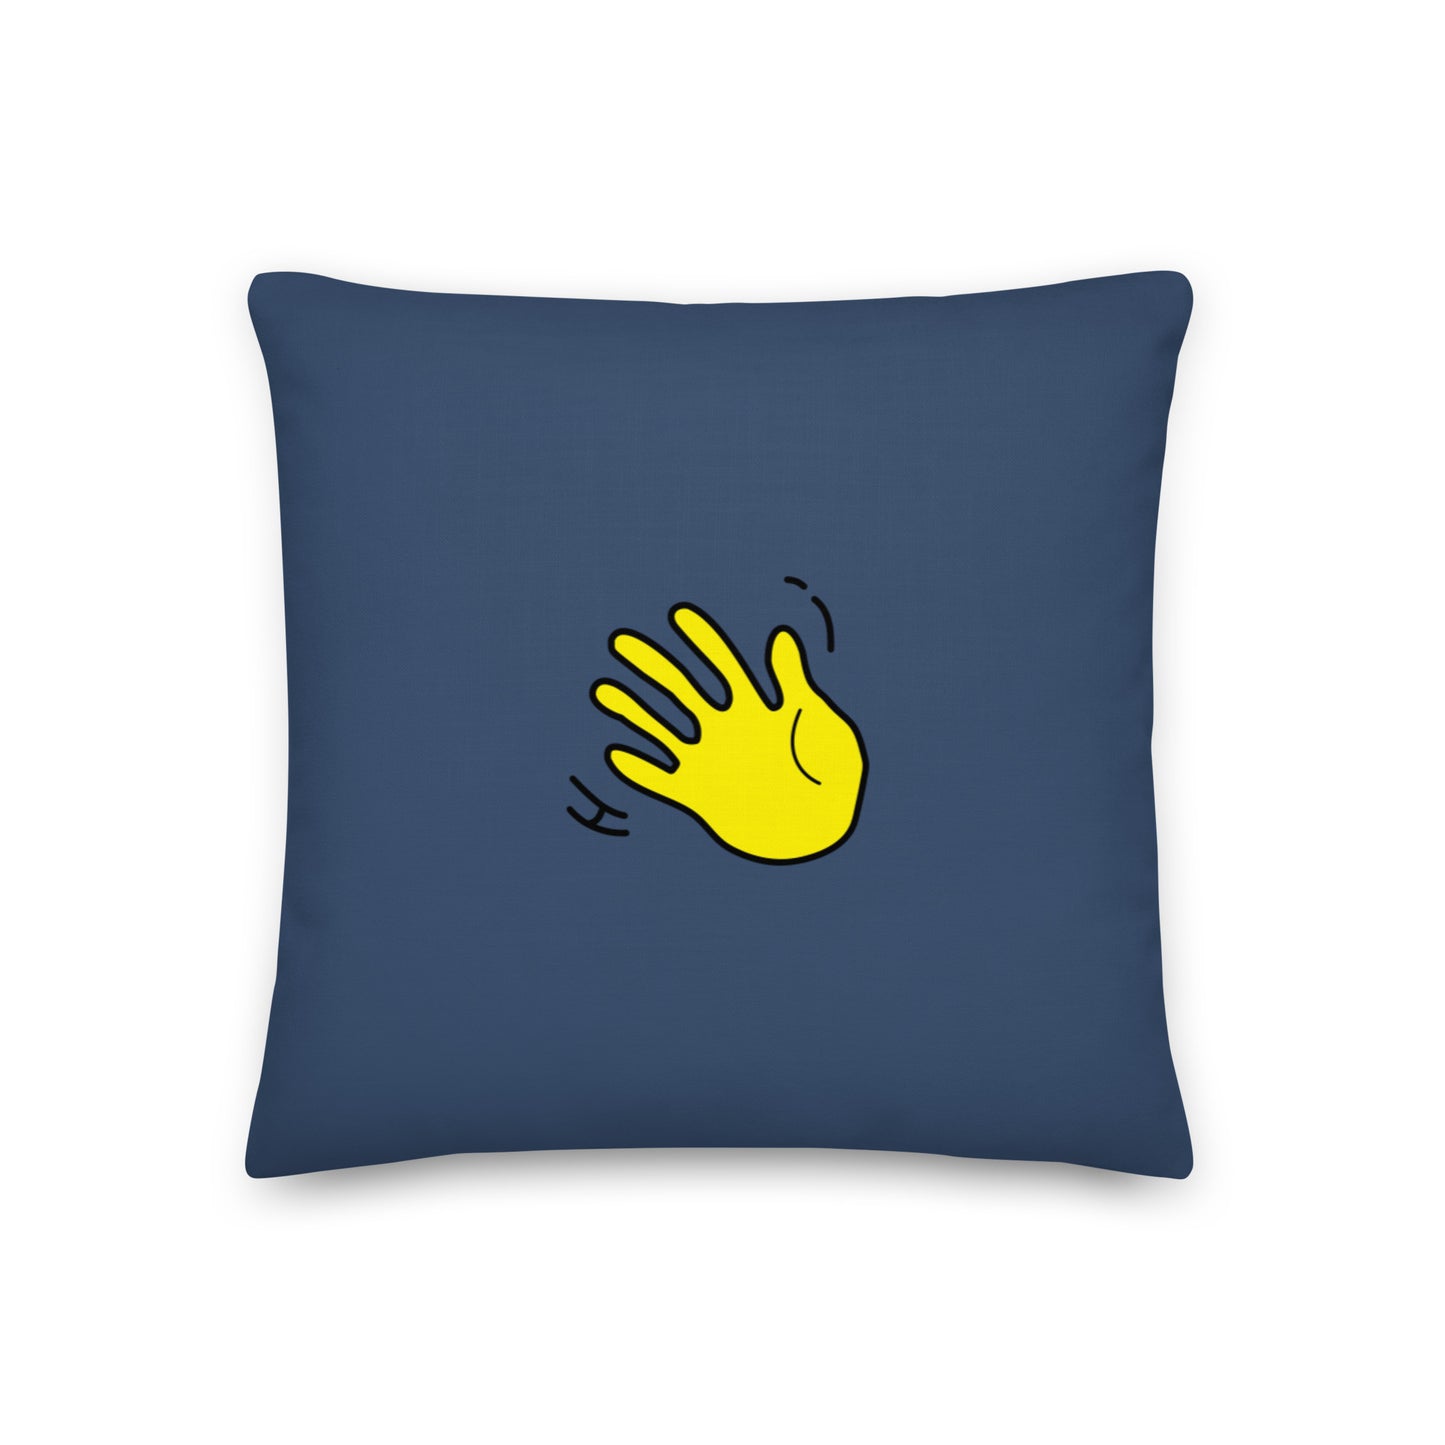 Hi Pillow in blue with Hi emoji by HiJohnny.com